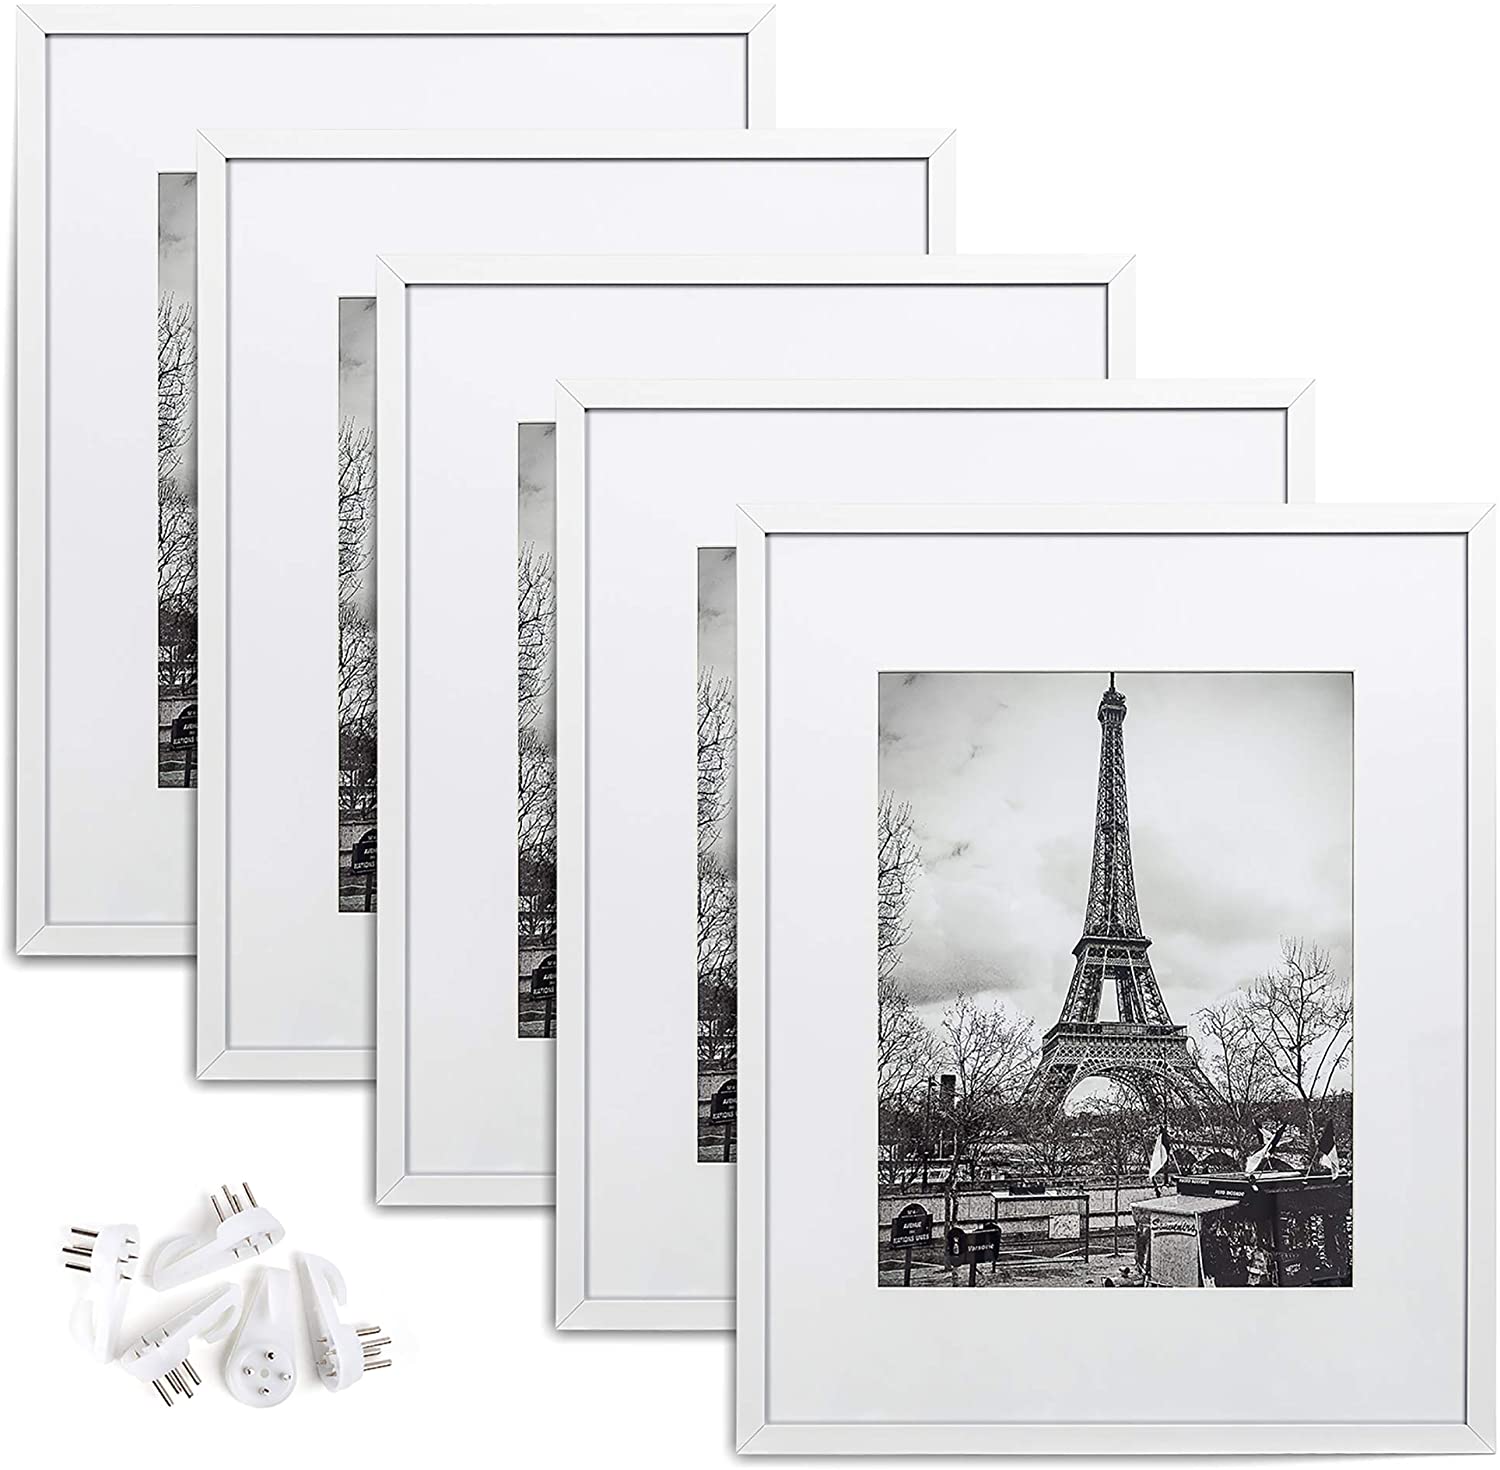 SYNTRIFIC 16x20 Rustic Picture Frames Set of 6,Distressed White Farmhouse  Photo Frames Display Pictures 11x14 with Mat or 16x20 Without Mat,Wall